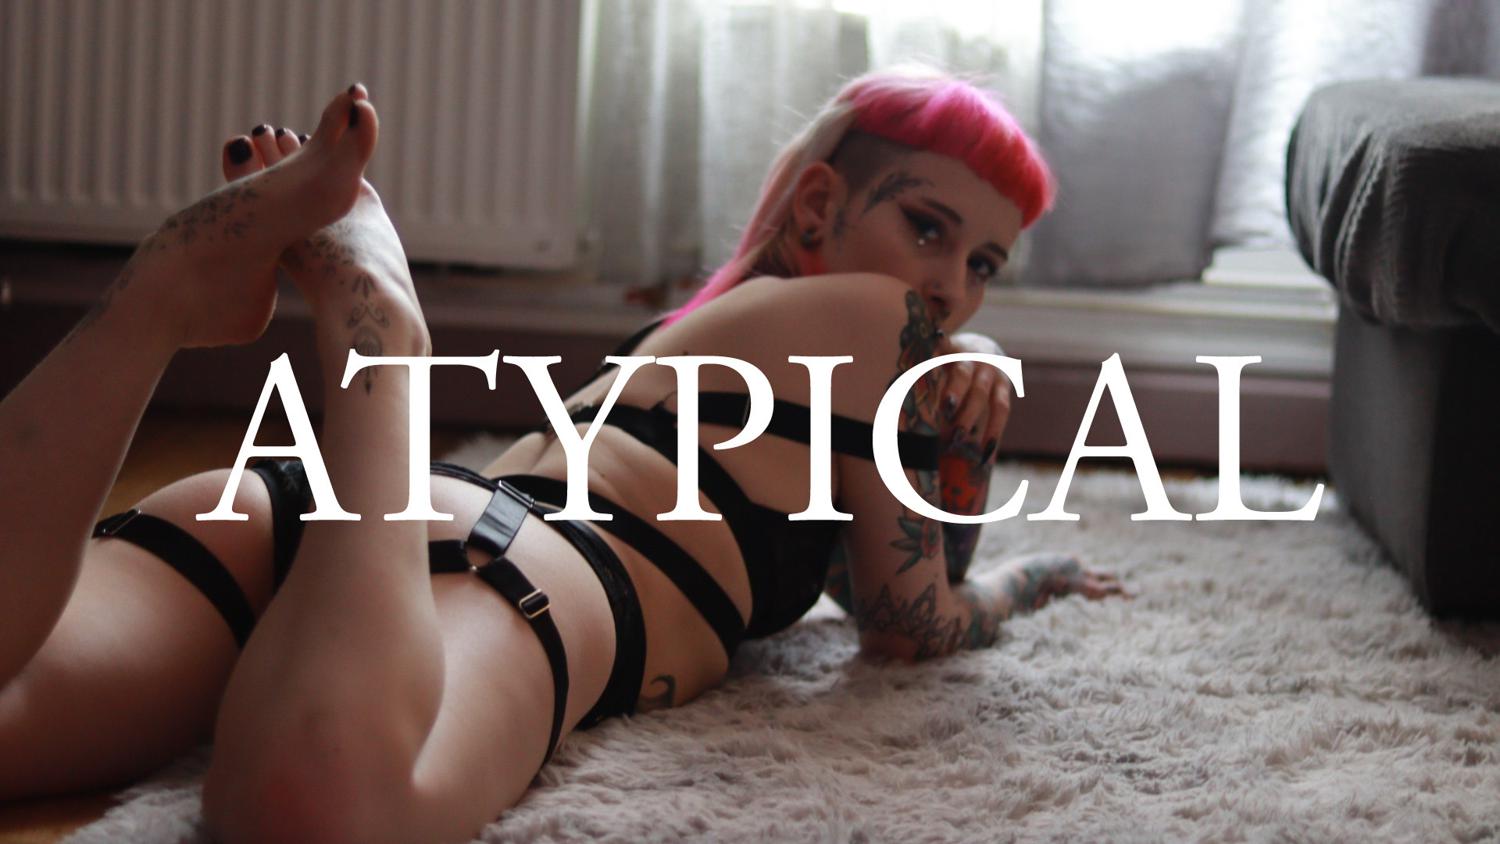 @Atypical_me Header